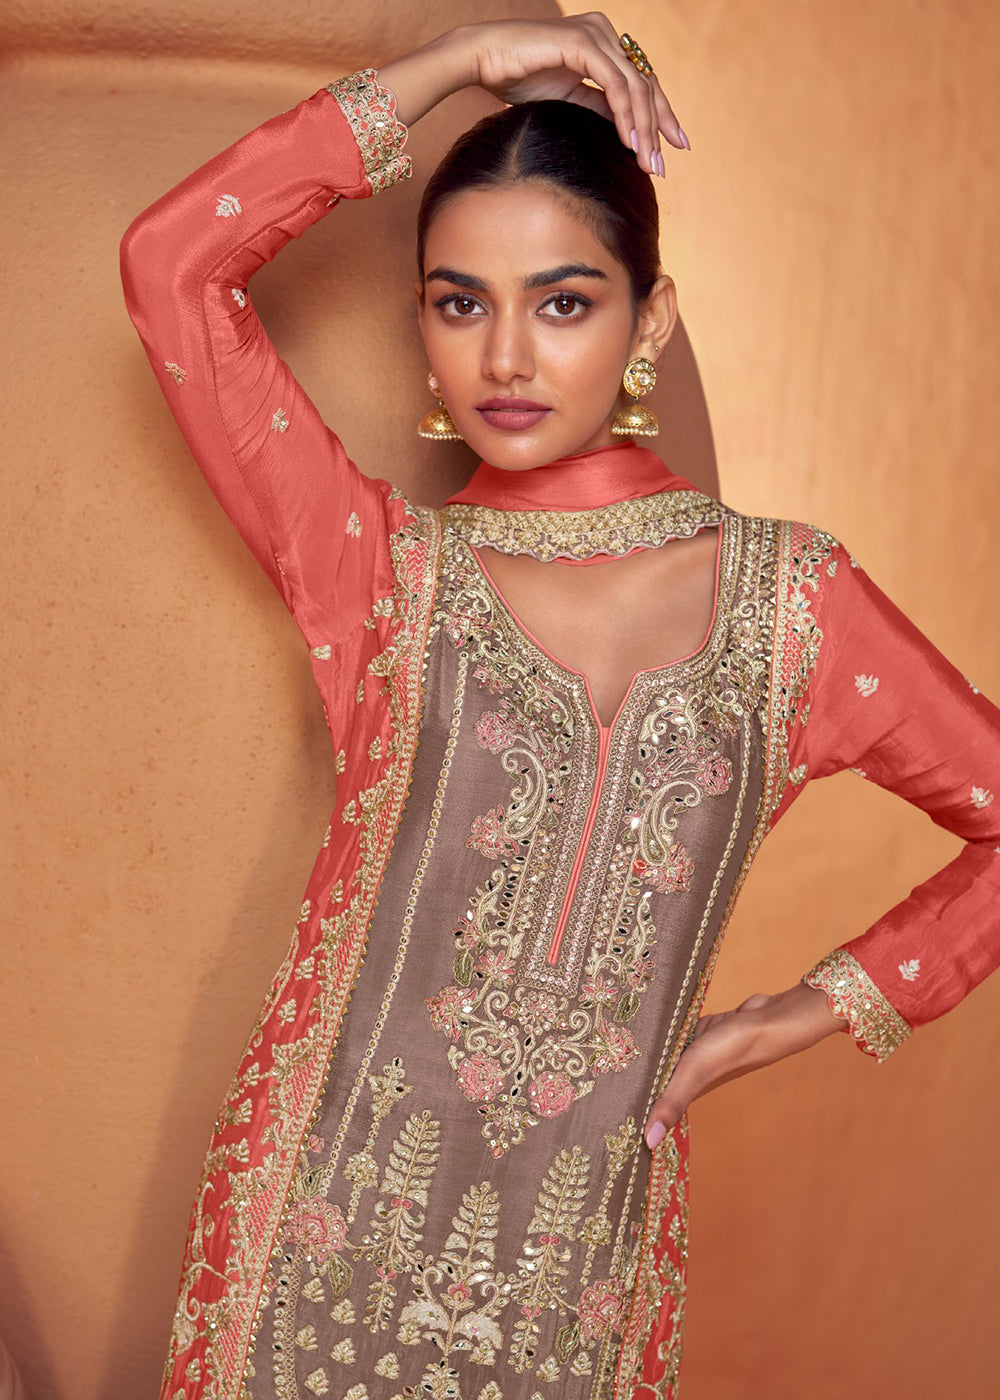 Shop Now Dusty Mauve & Peach Embroidered Wedding Sharara Suit Online at Empress Clothing in USA, UK, Canada, Italy & Worldwide.